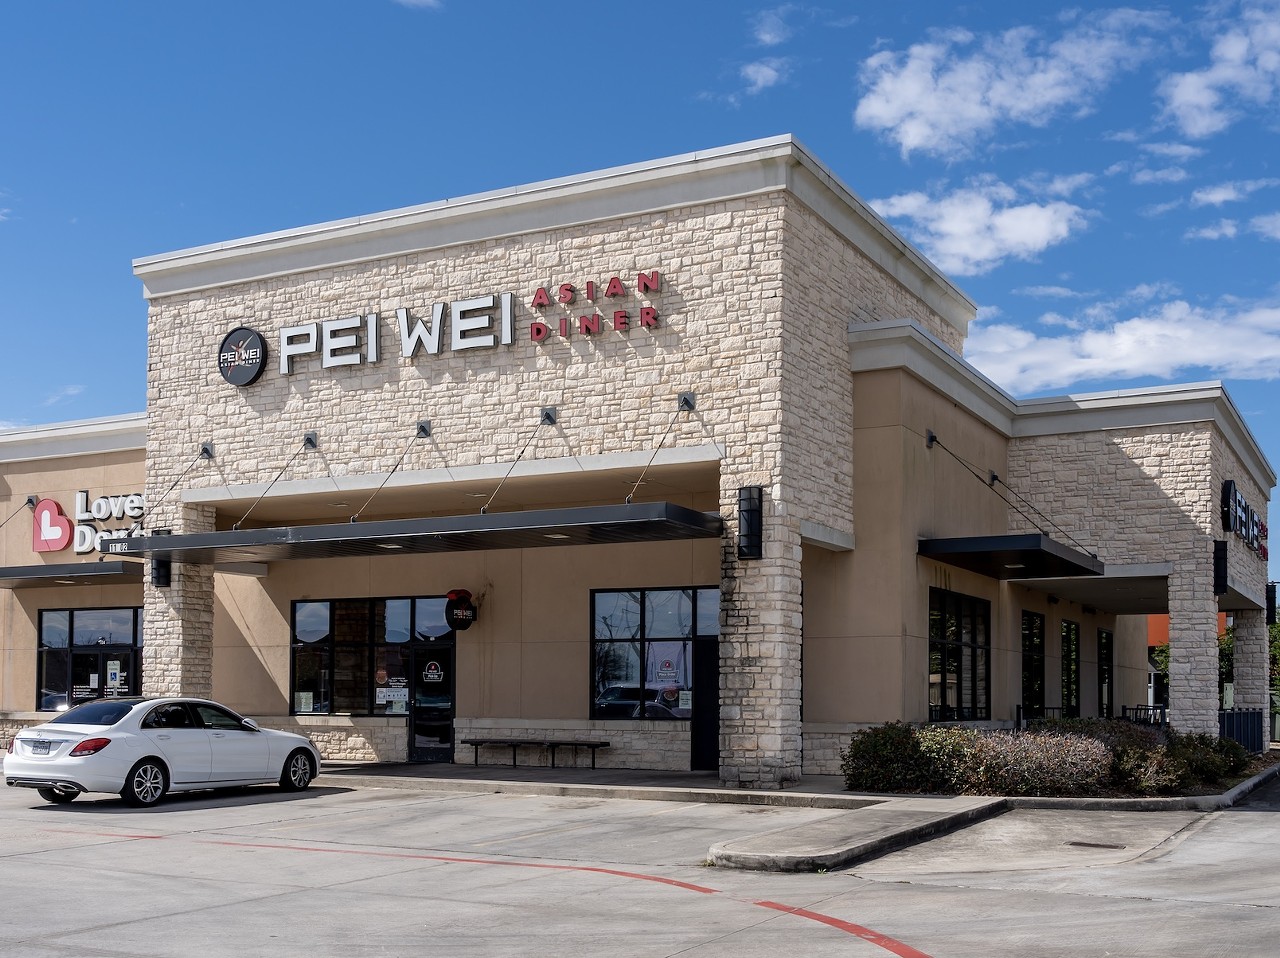 Pei Wei Asian Kitchen
Multiple Locations, peiwei.com
Foodies who enjoy fast-casual Chinese bites with a take more elevated than strip mall take-out restaurants can rest easy with Pei Wei. Headquartered in Irving, this Asian kitchen chain brings all the classic dishes you know and love.